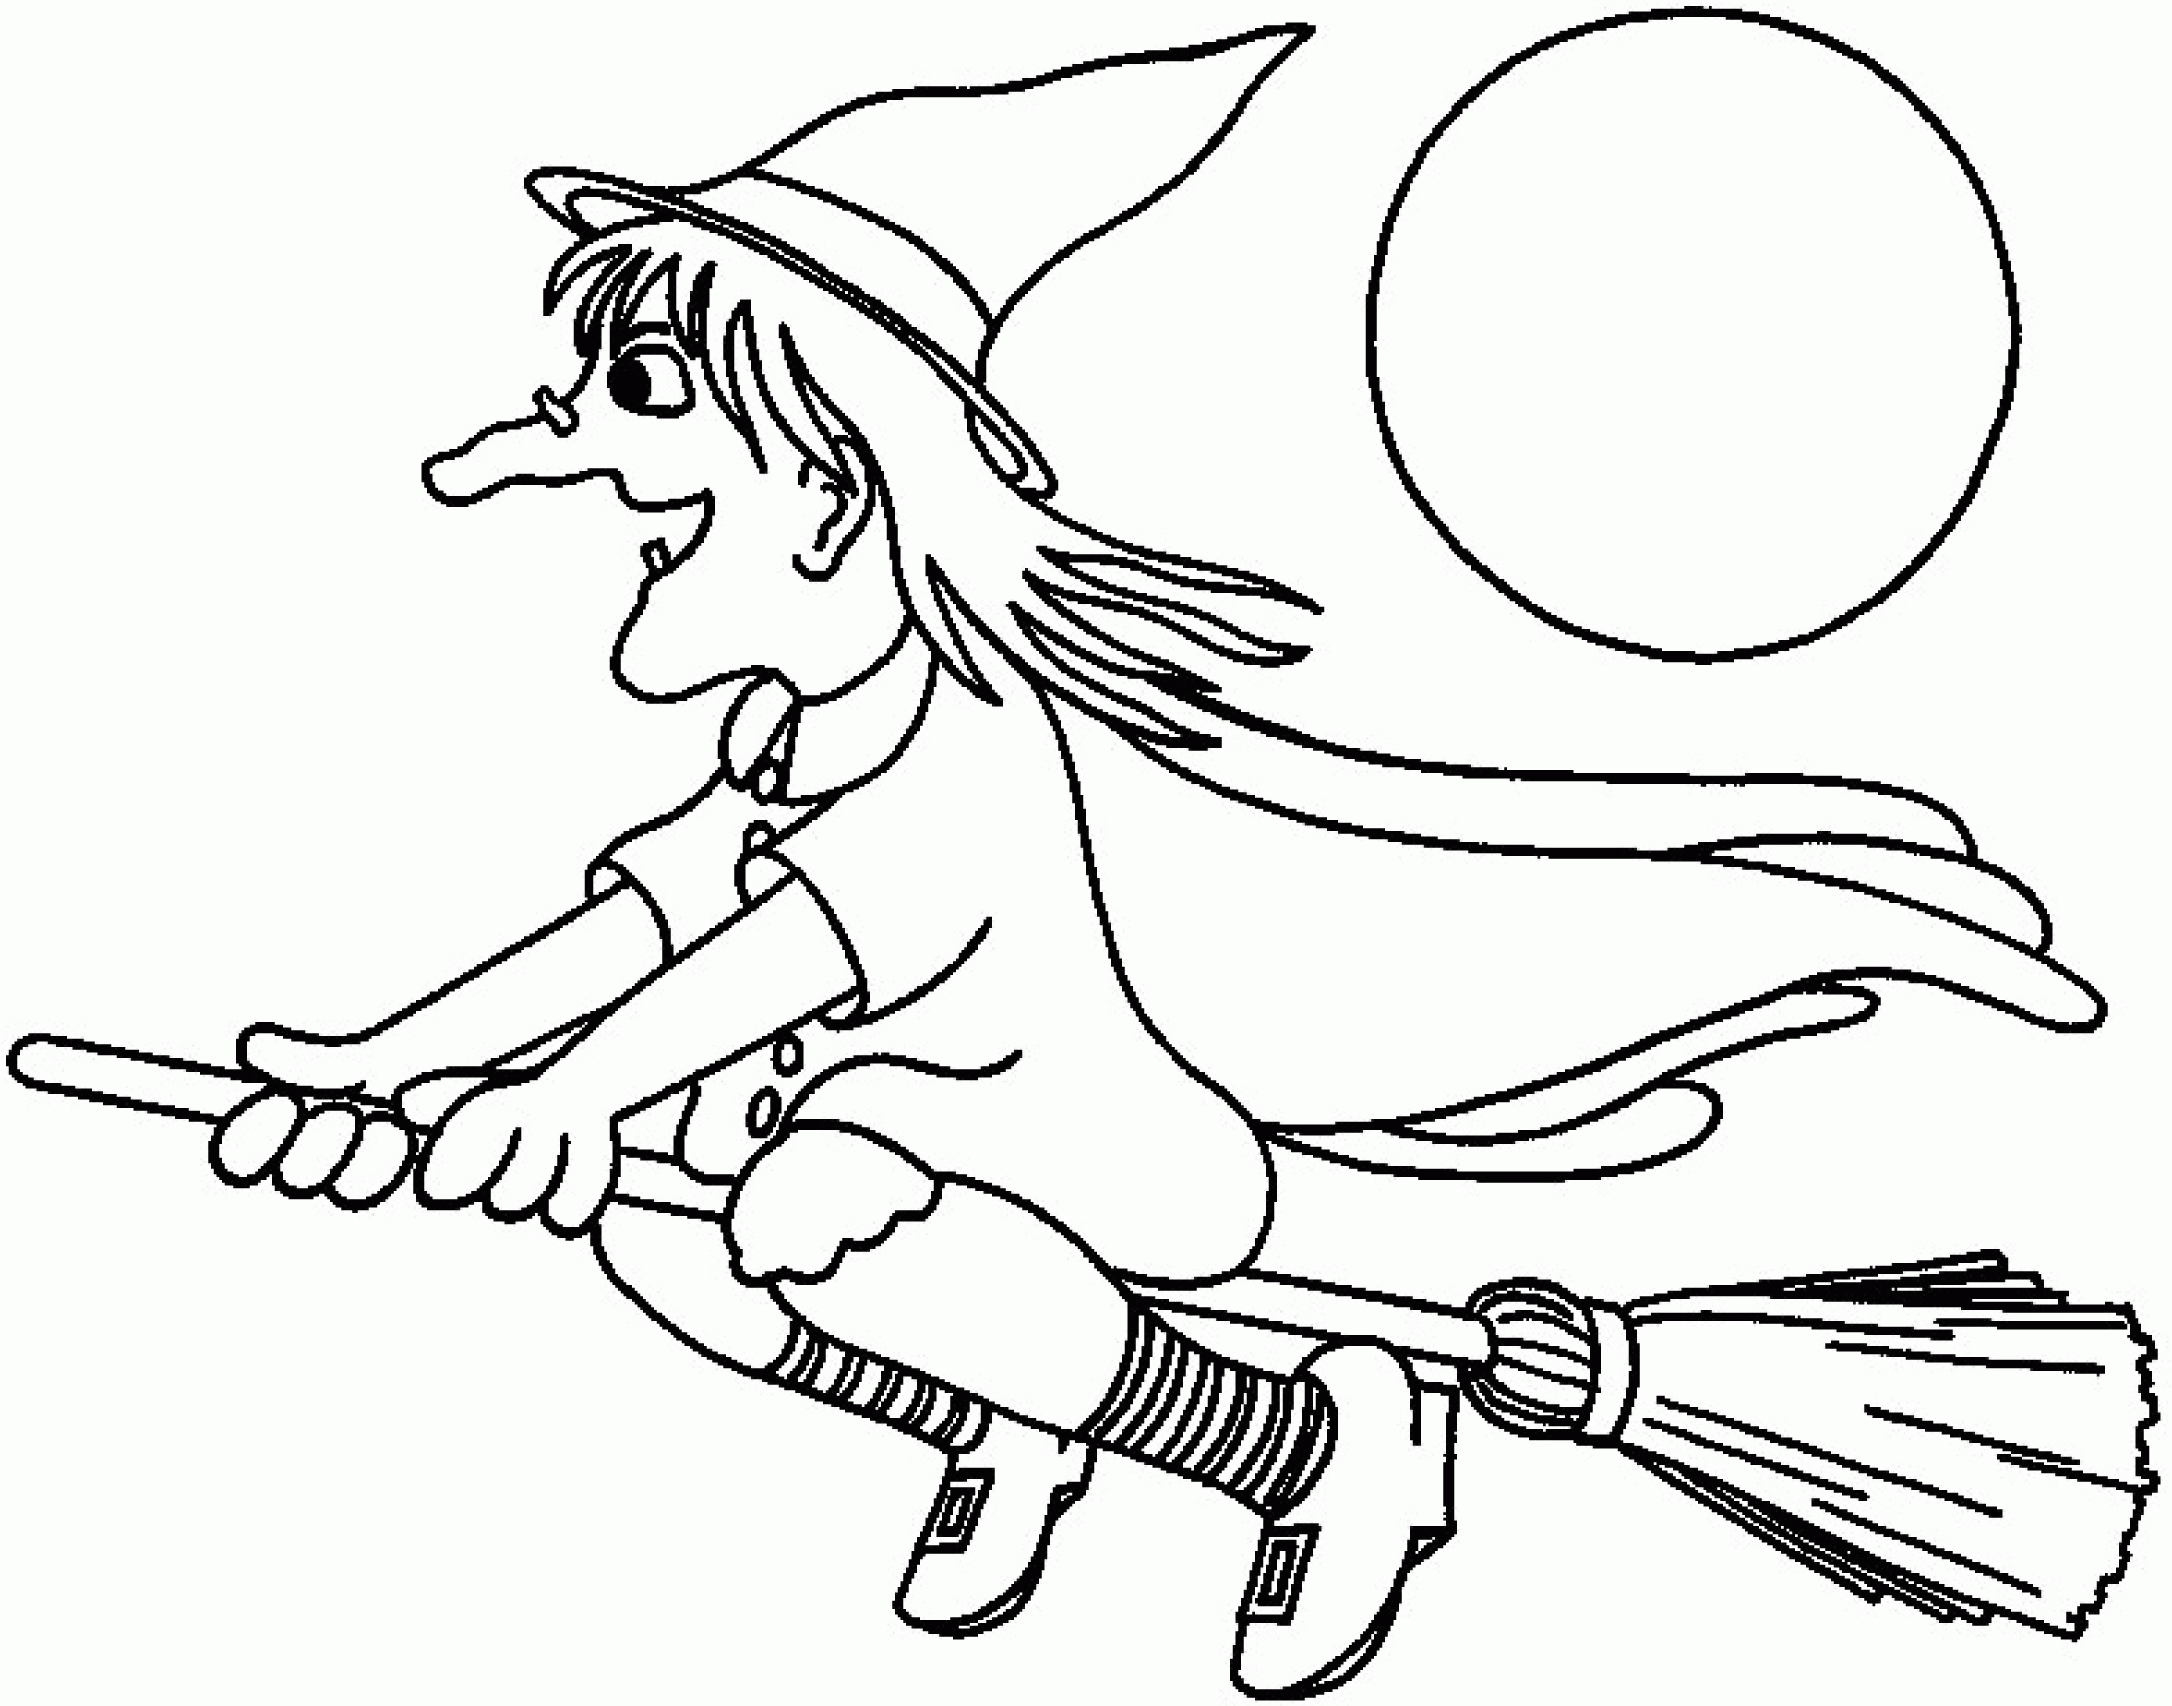 Free Coloring Page Of Witches - Coloring Home - Free Printable Pictures Of Witches